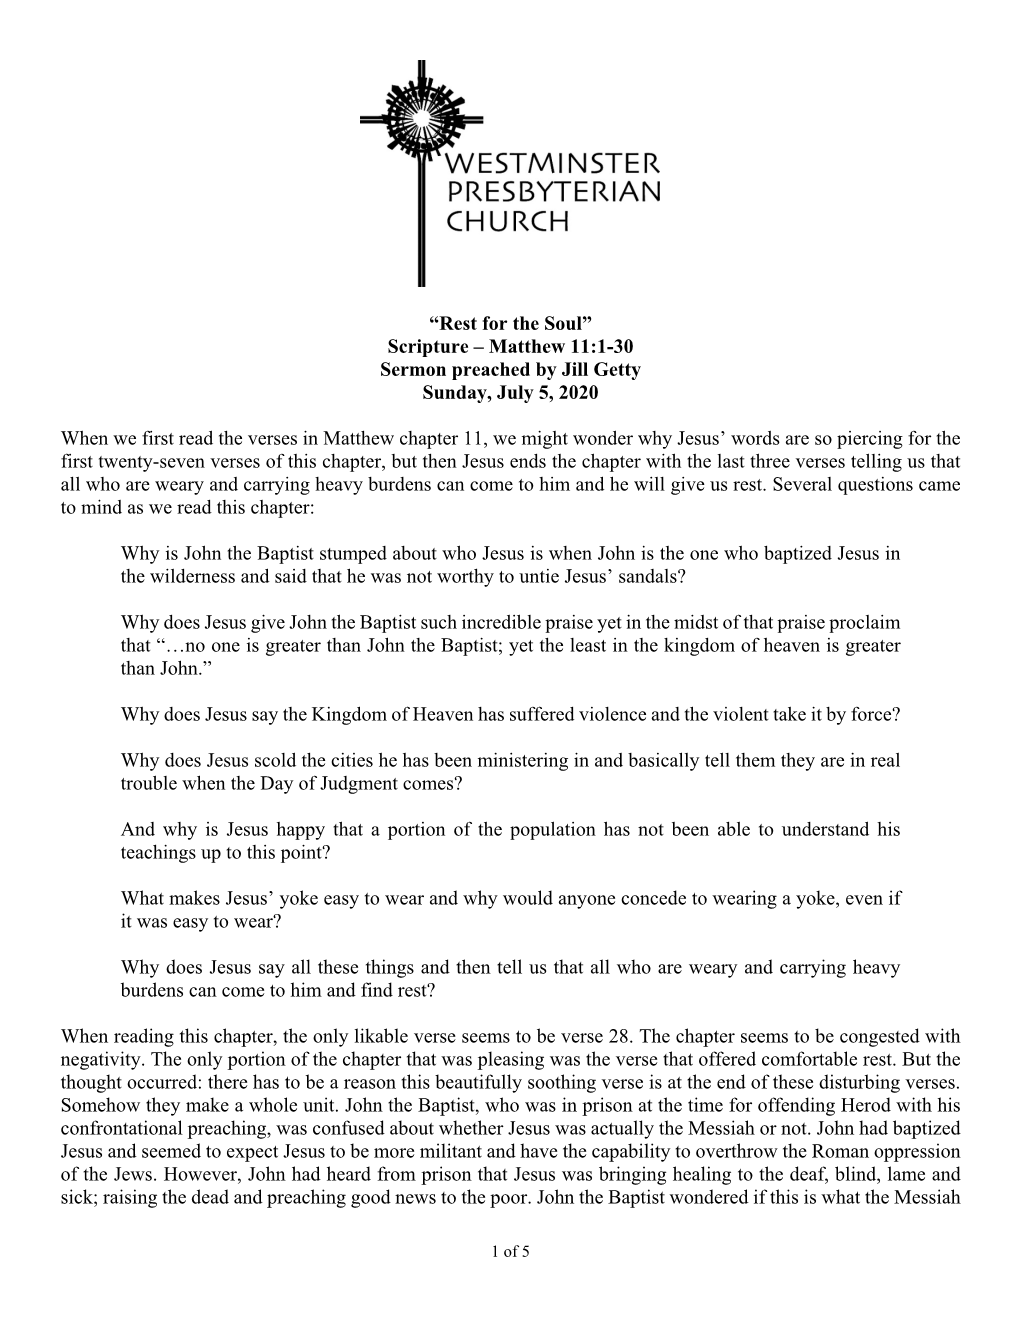 “Rest for the Soul” Scripture – Matthew 11:1-30 Sermon Preached by Jill Getty Sunday, July 5, 2020